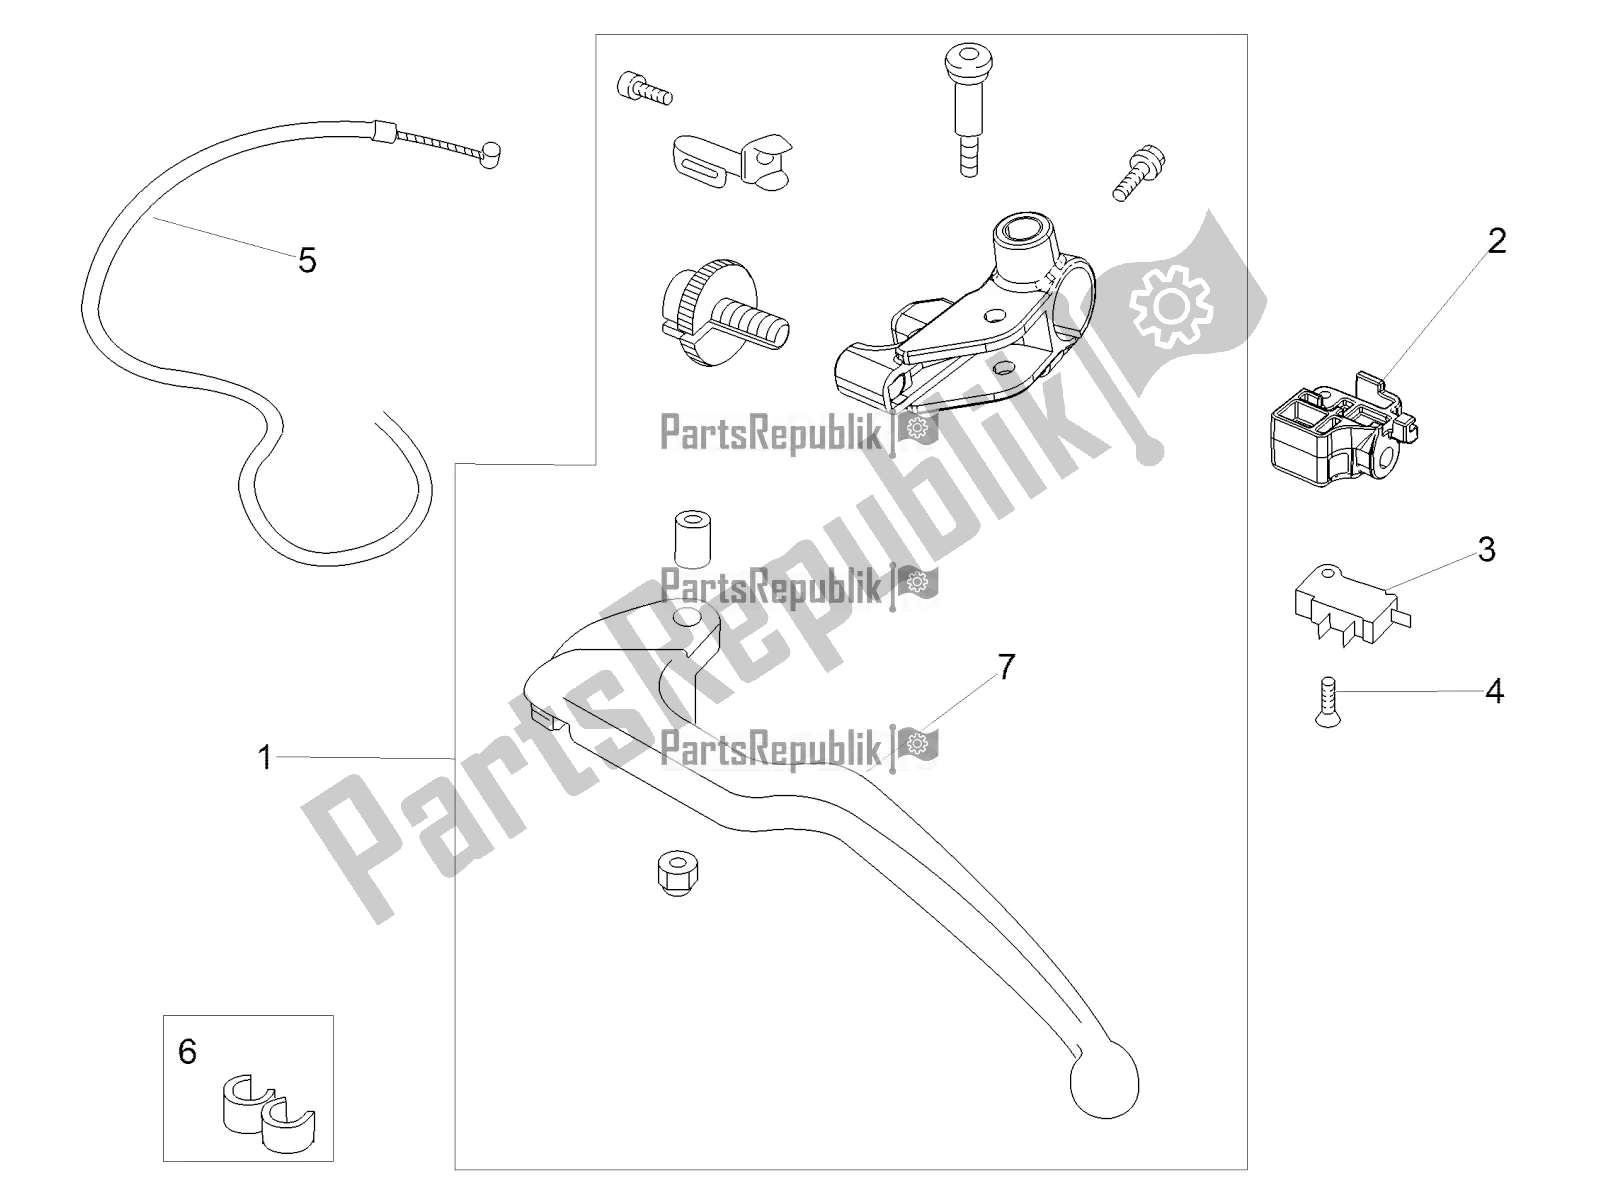 All parts for the Clutch Control of the Aprilia RSV4 RR ABS 1000 2019